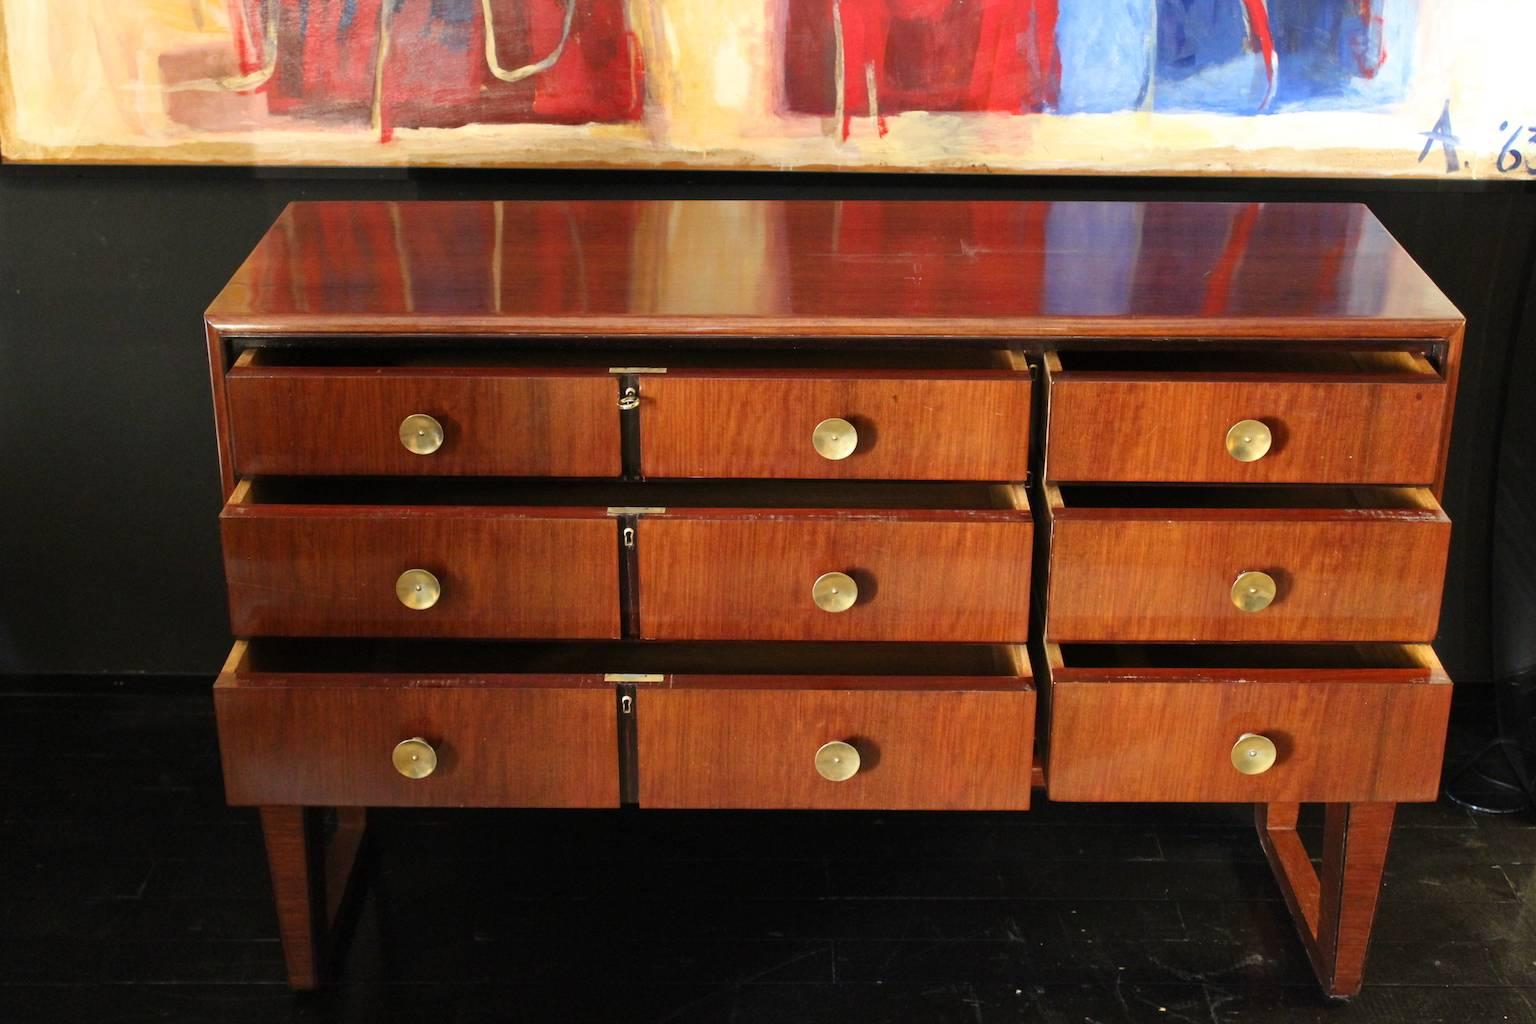 1940s rosewood chest of drawers, six drawers and brass handles.